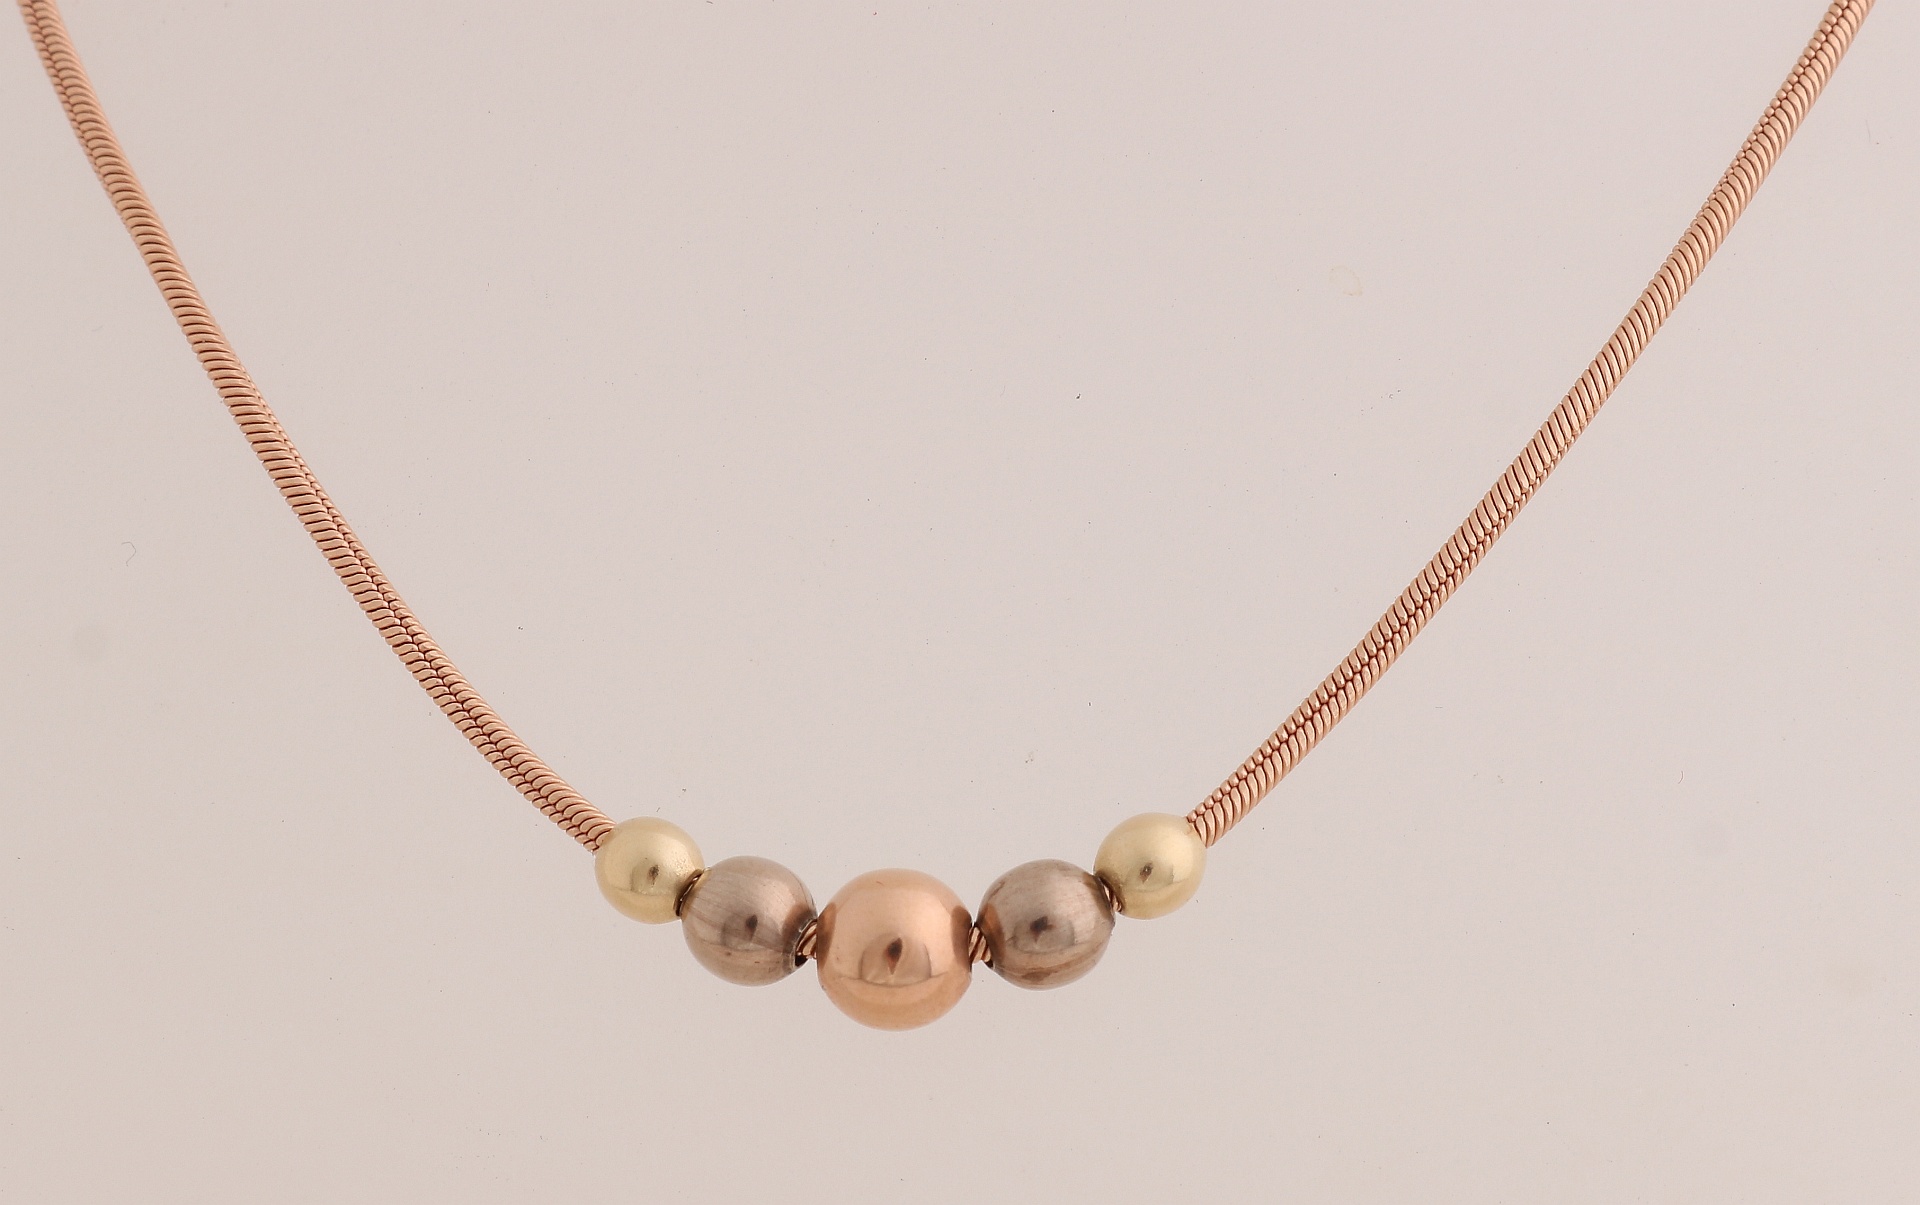 Golden necklace with spheres